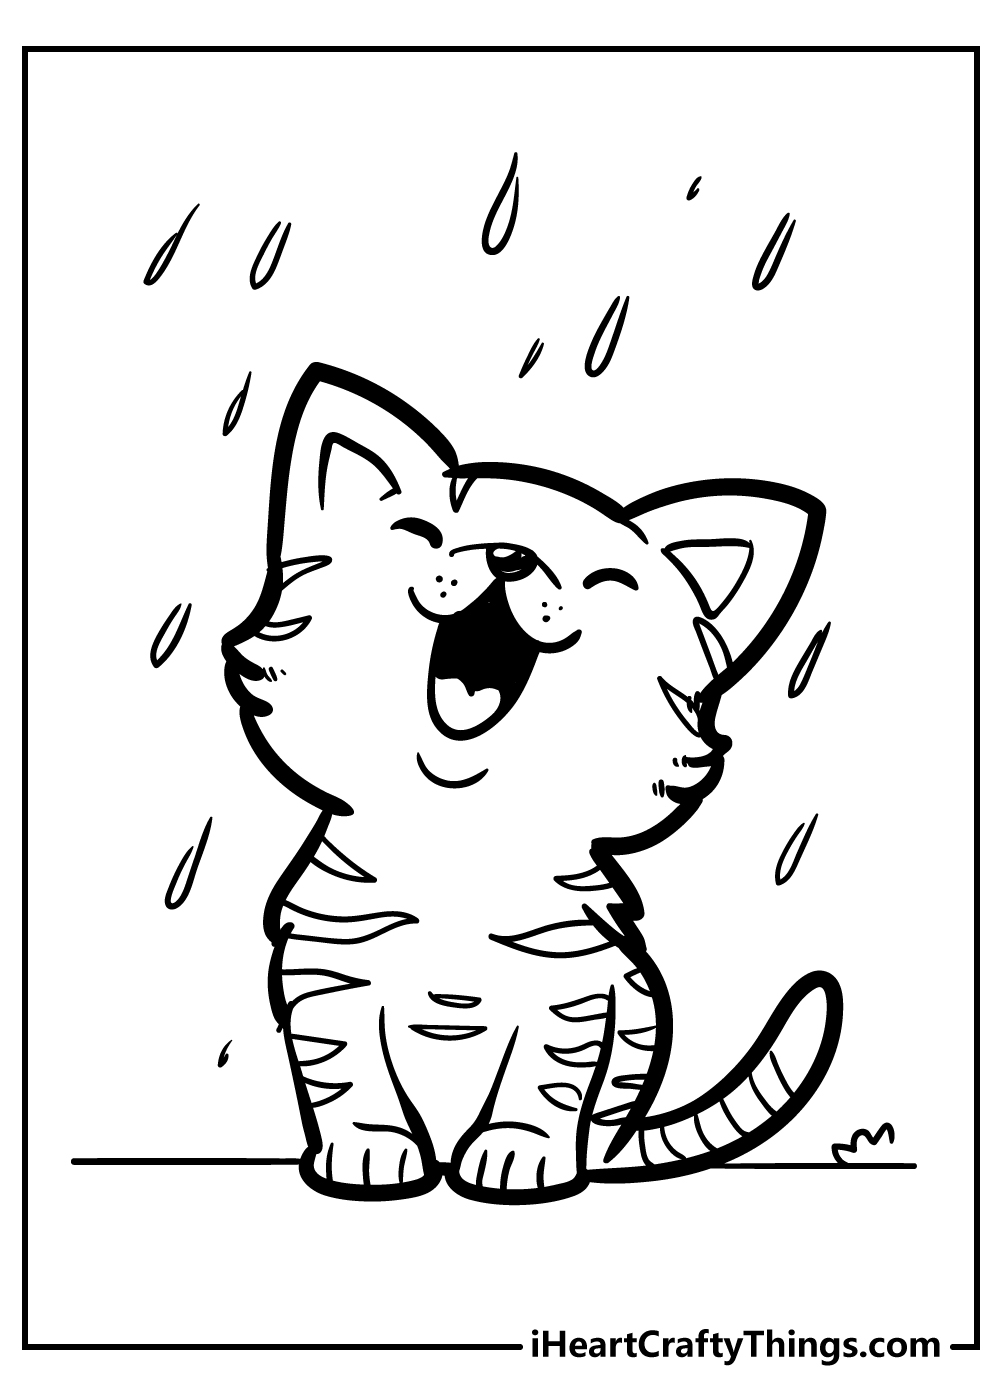 20 Kitten Coloring Pages Updated 20